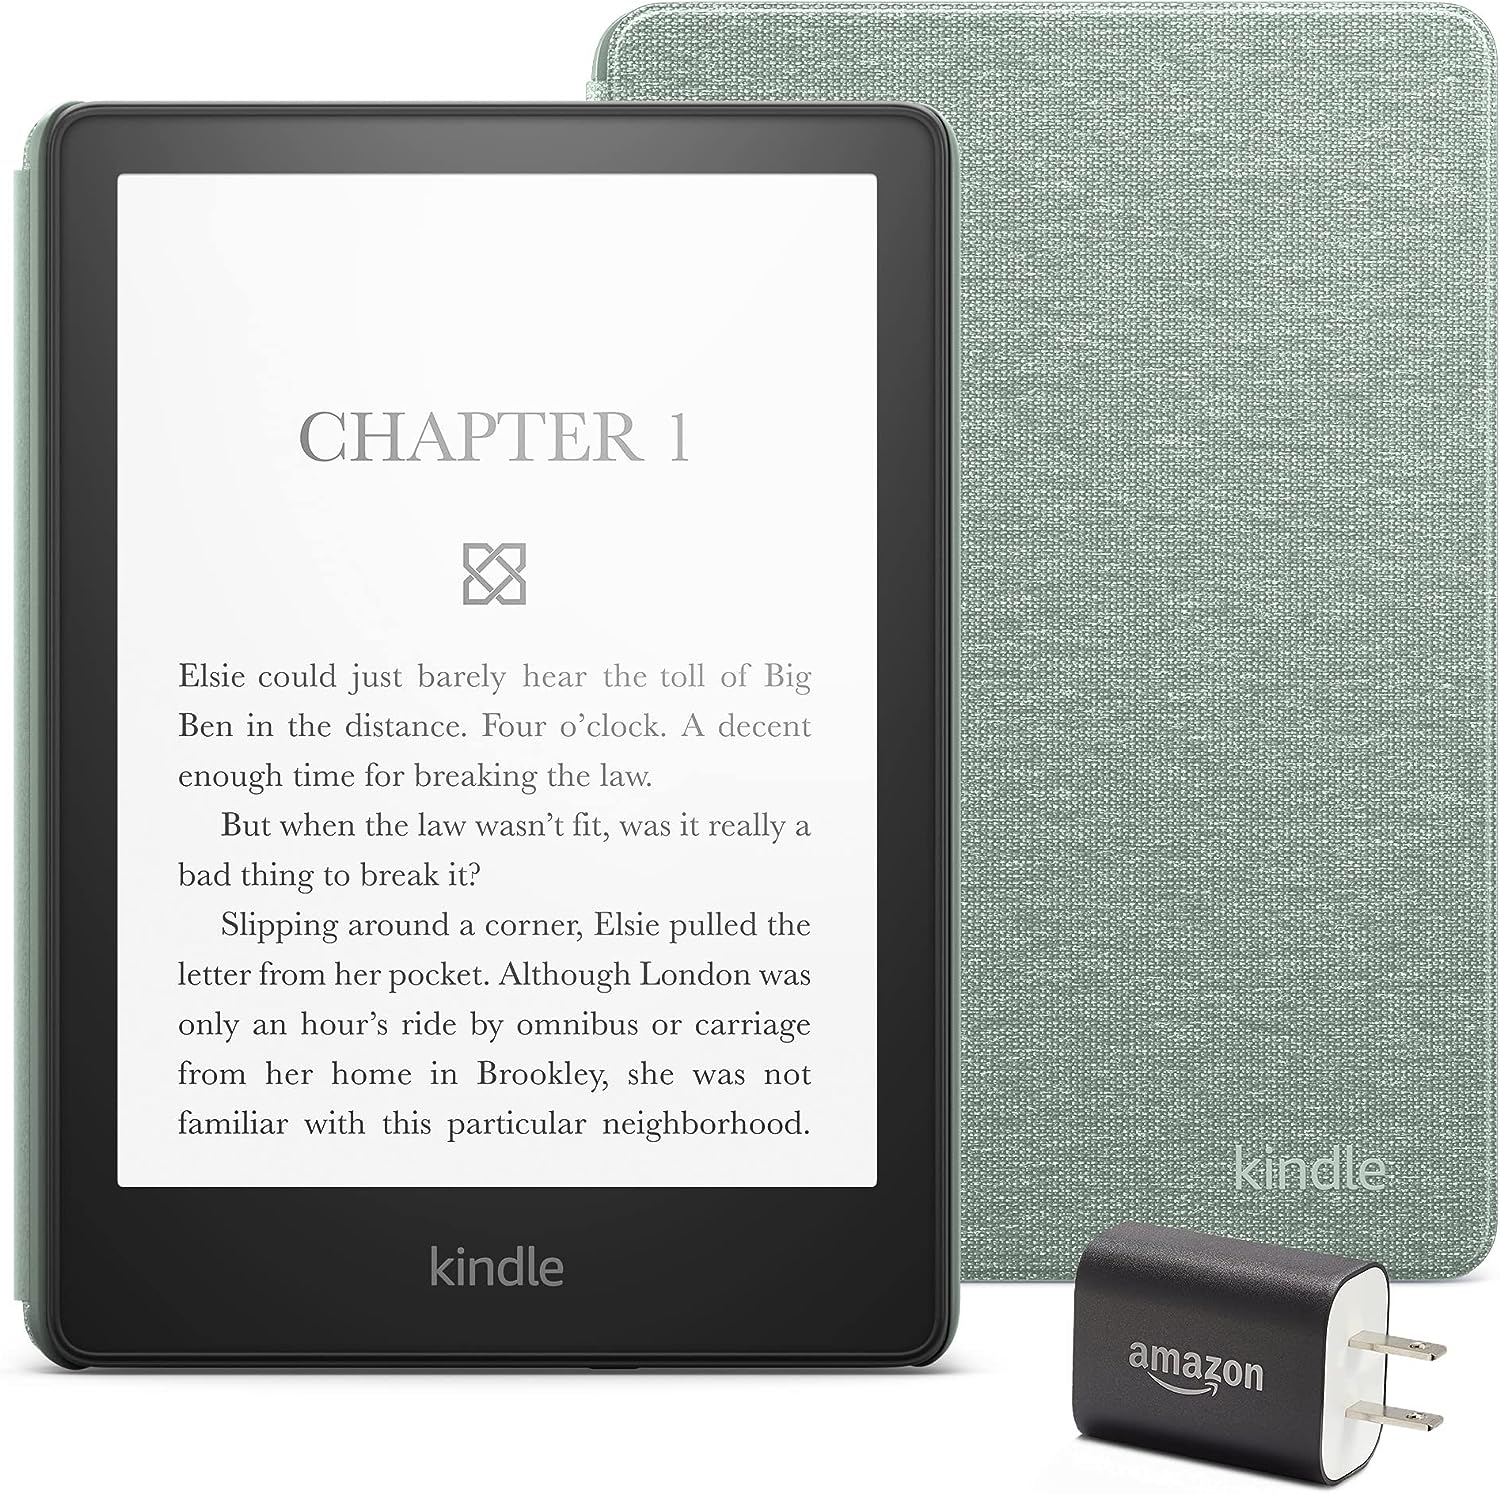 Kindle Paperwhite (8 GB) – Now with a 6.8 display and adjustable warm  light - Without Lockscreen Ads + 3 Months Free Kindle Unlimited (with